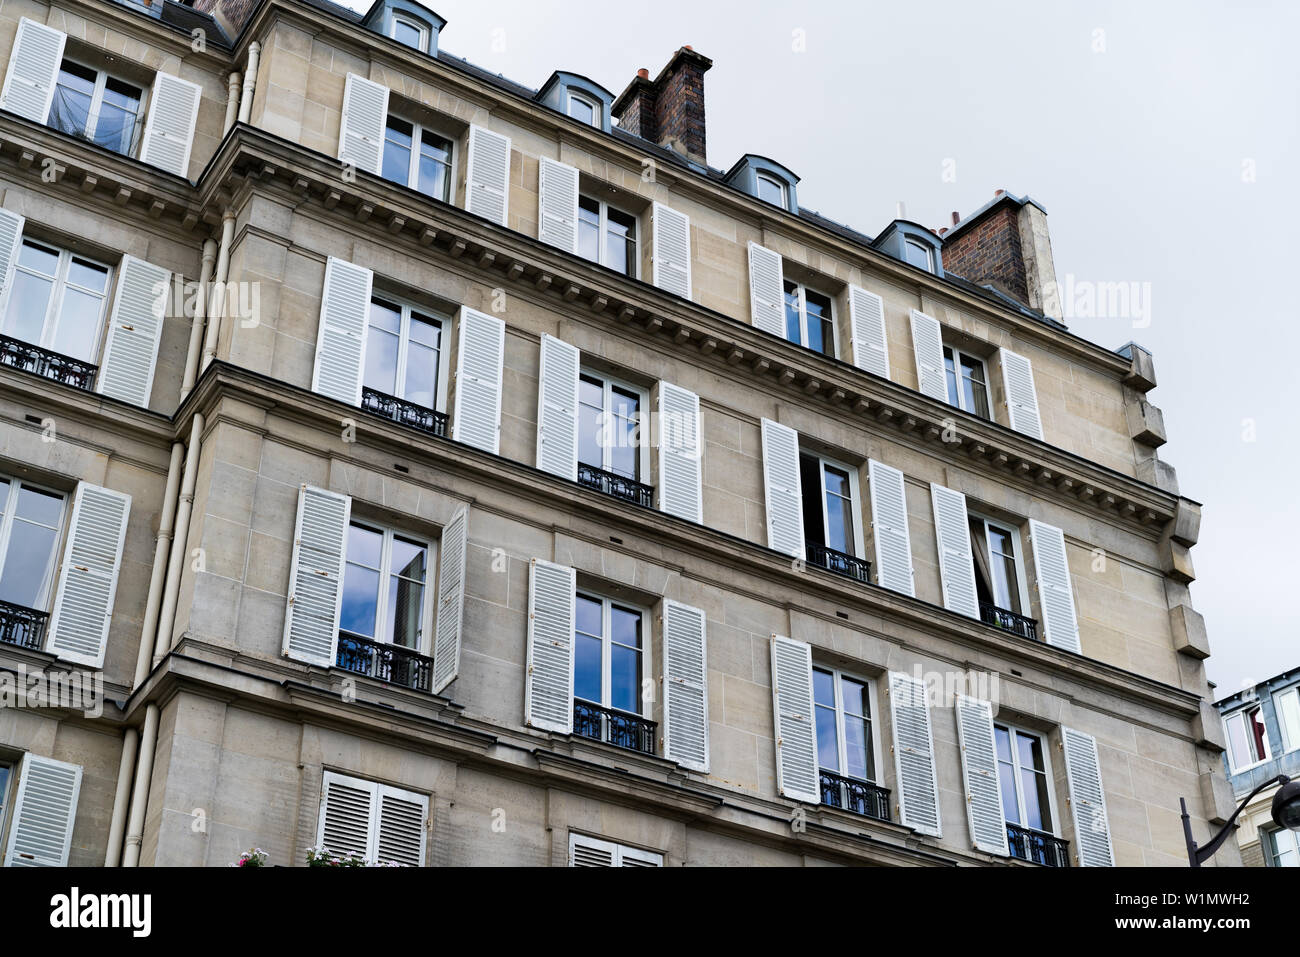 Paris, France - June 30, 2017: traditional architecture of residential buildings, french windows. Stock Photo